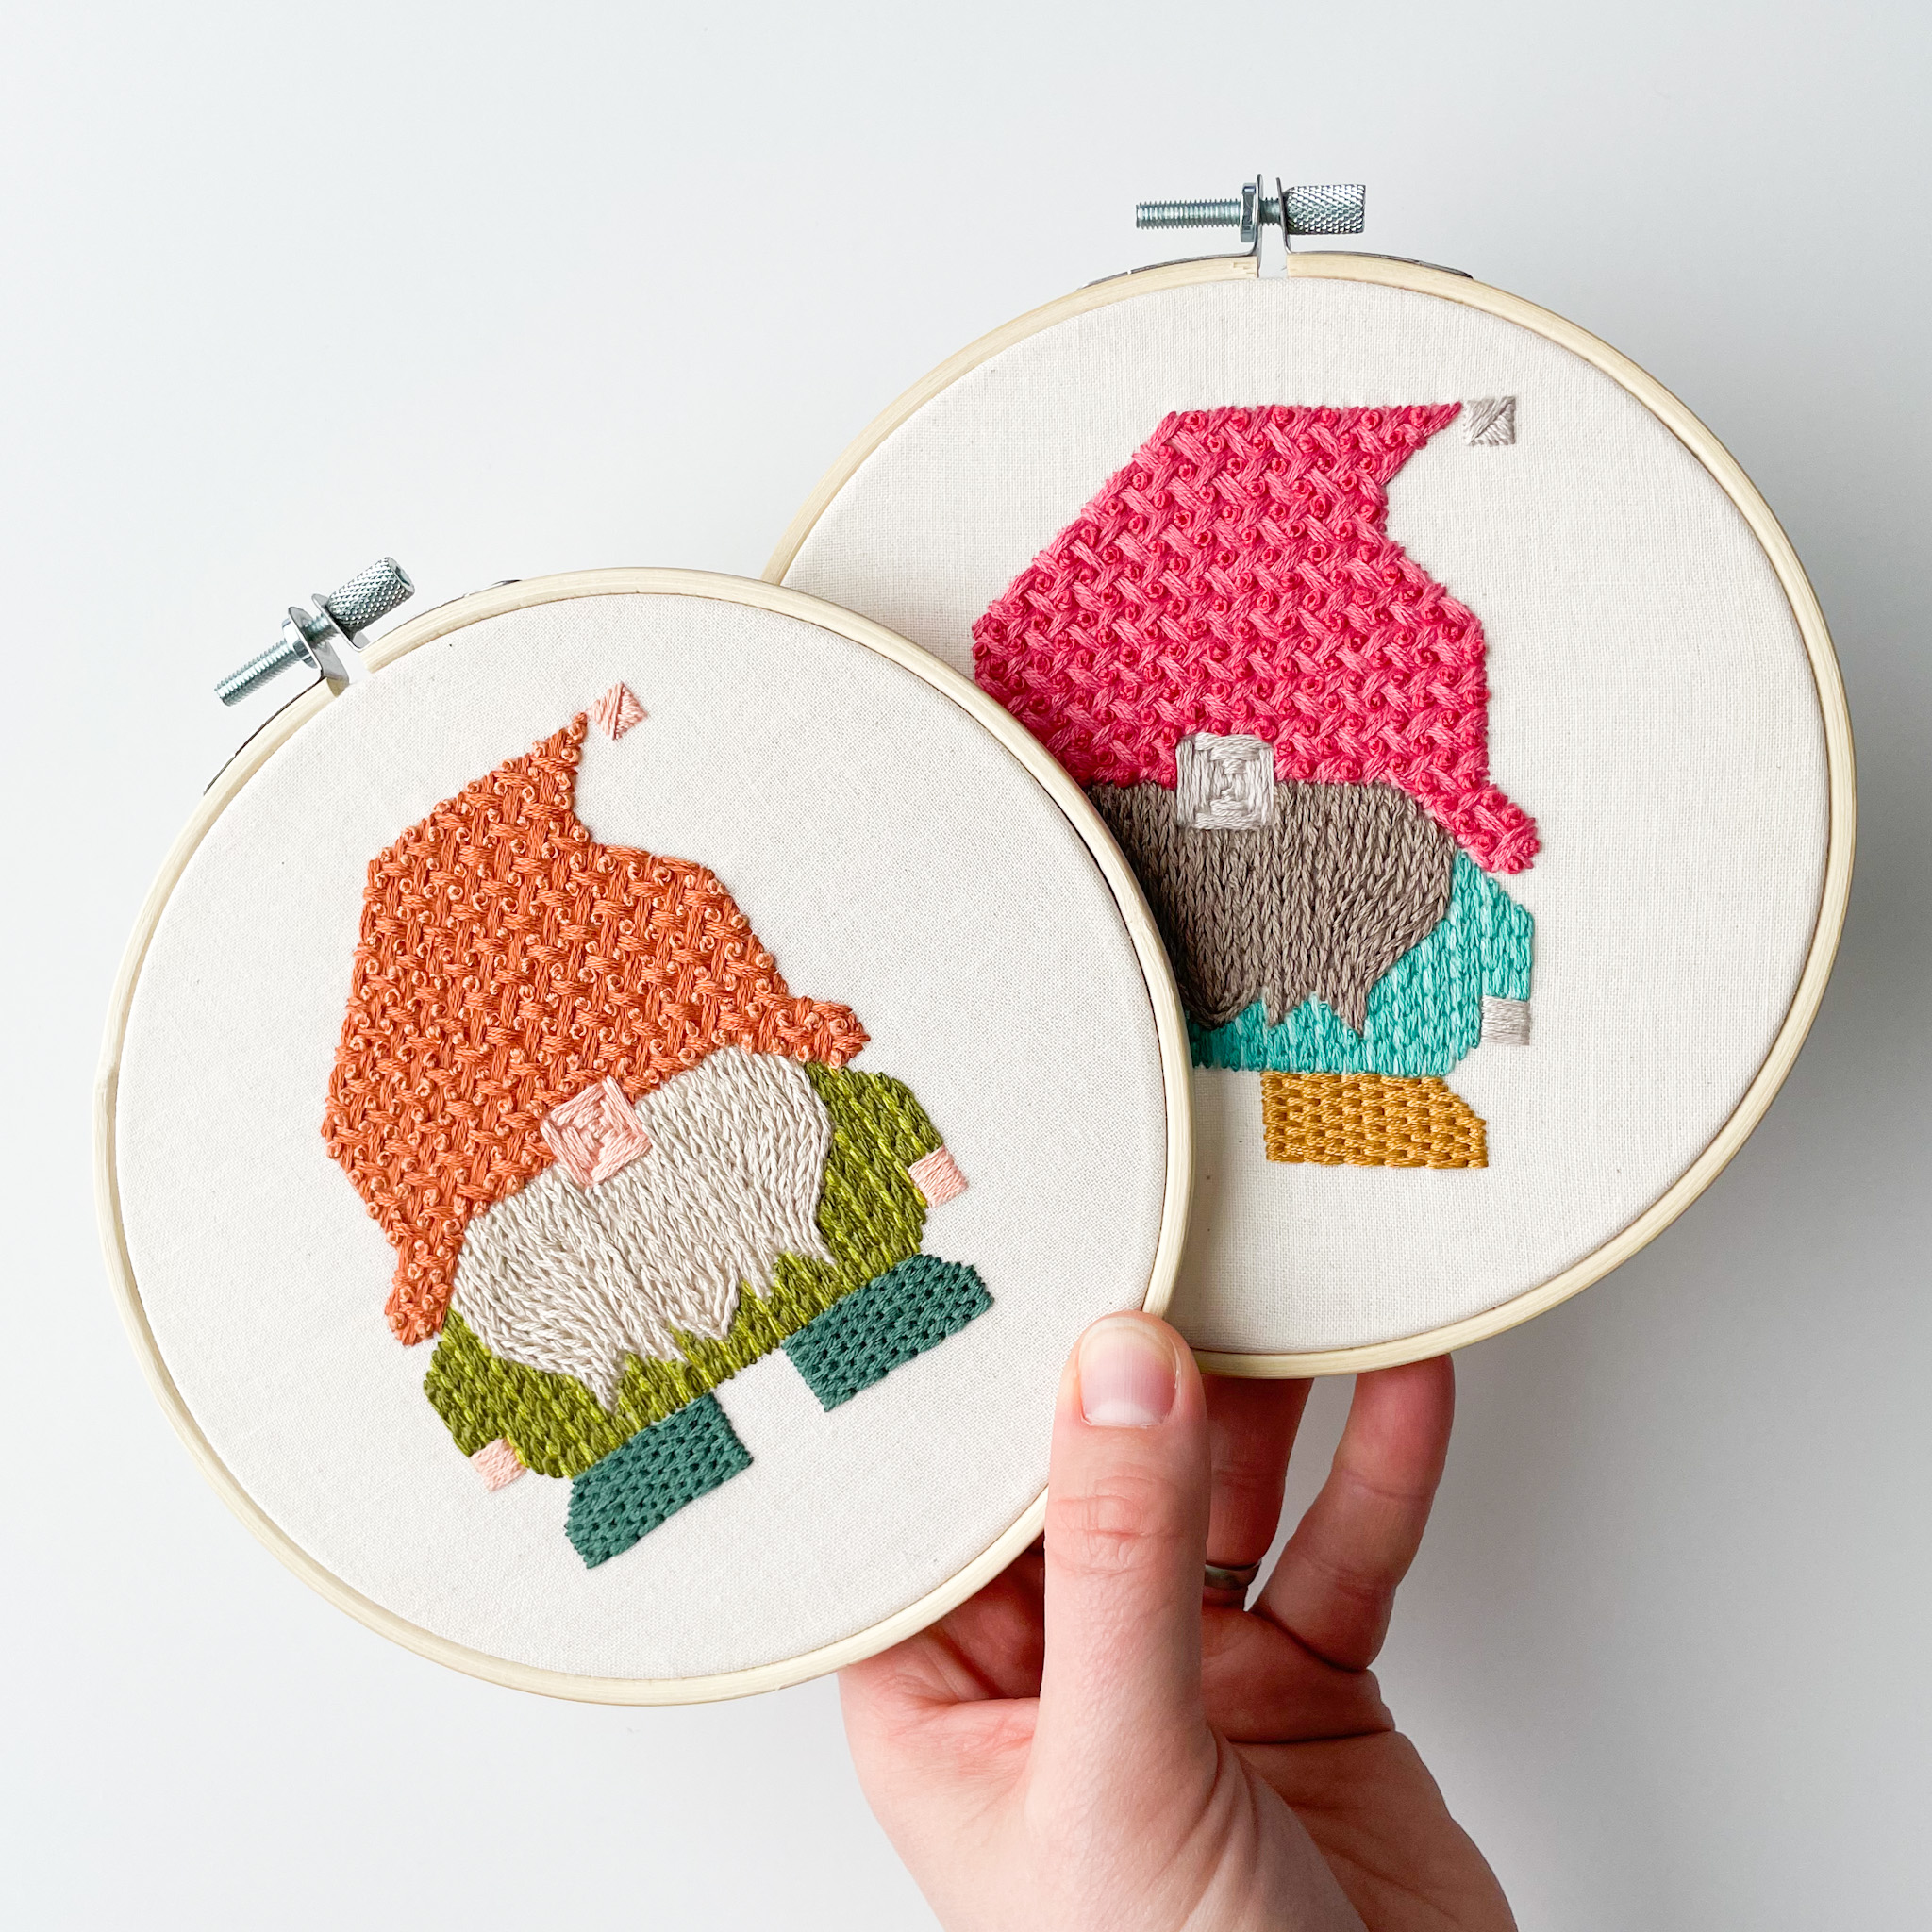 Two embroidery hoops with gnomes stitched on both. The embroidery's feature basket weave, stem stitch, backstitch, chain stitch, and brick stitch.